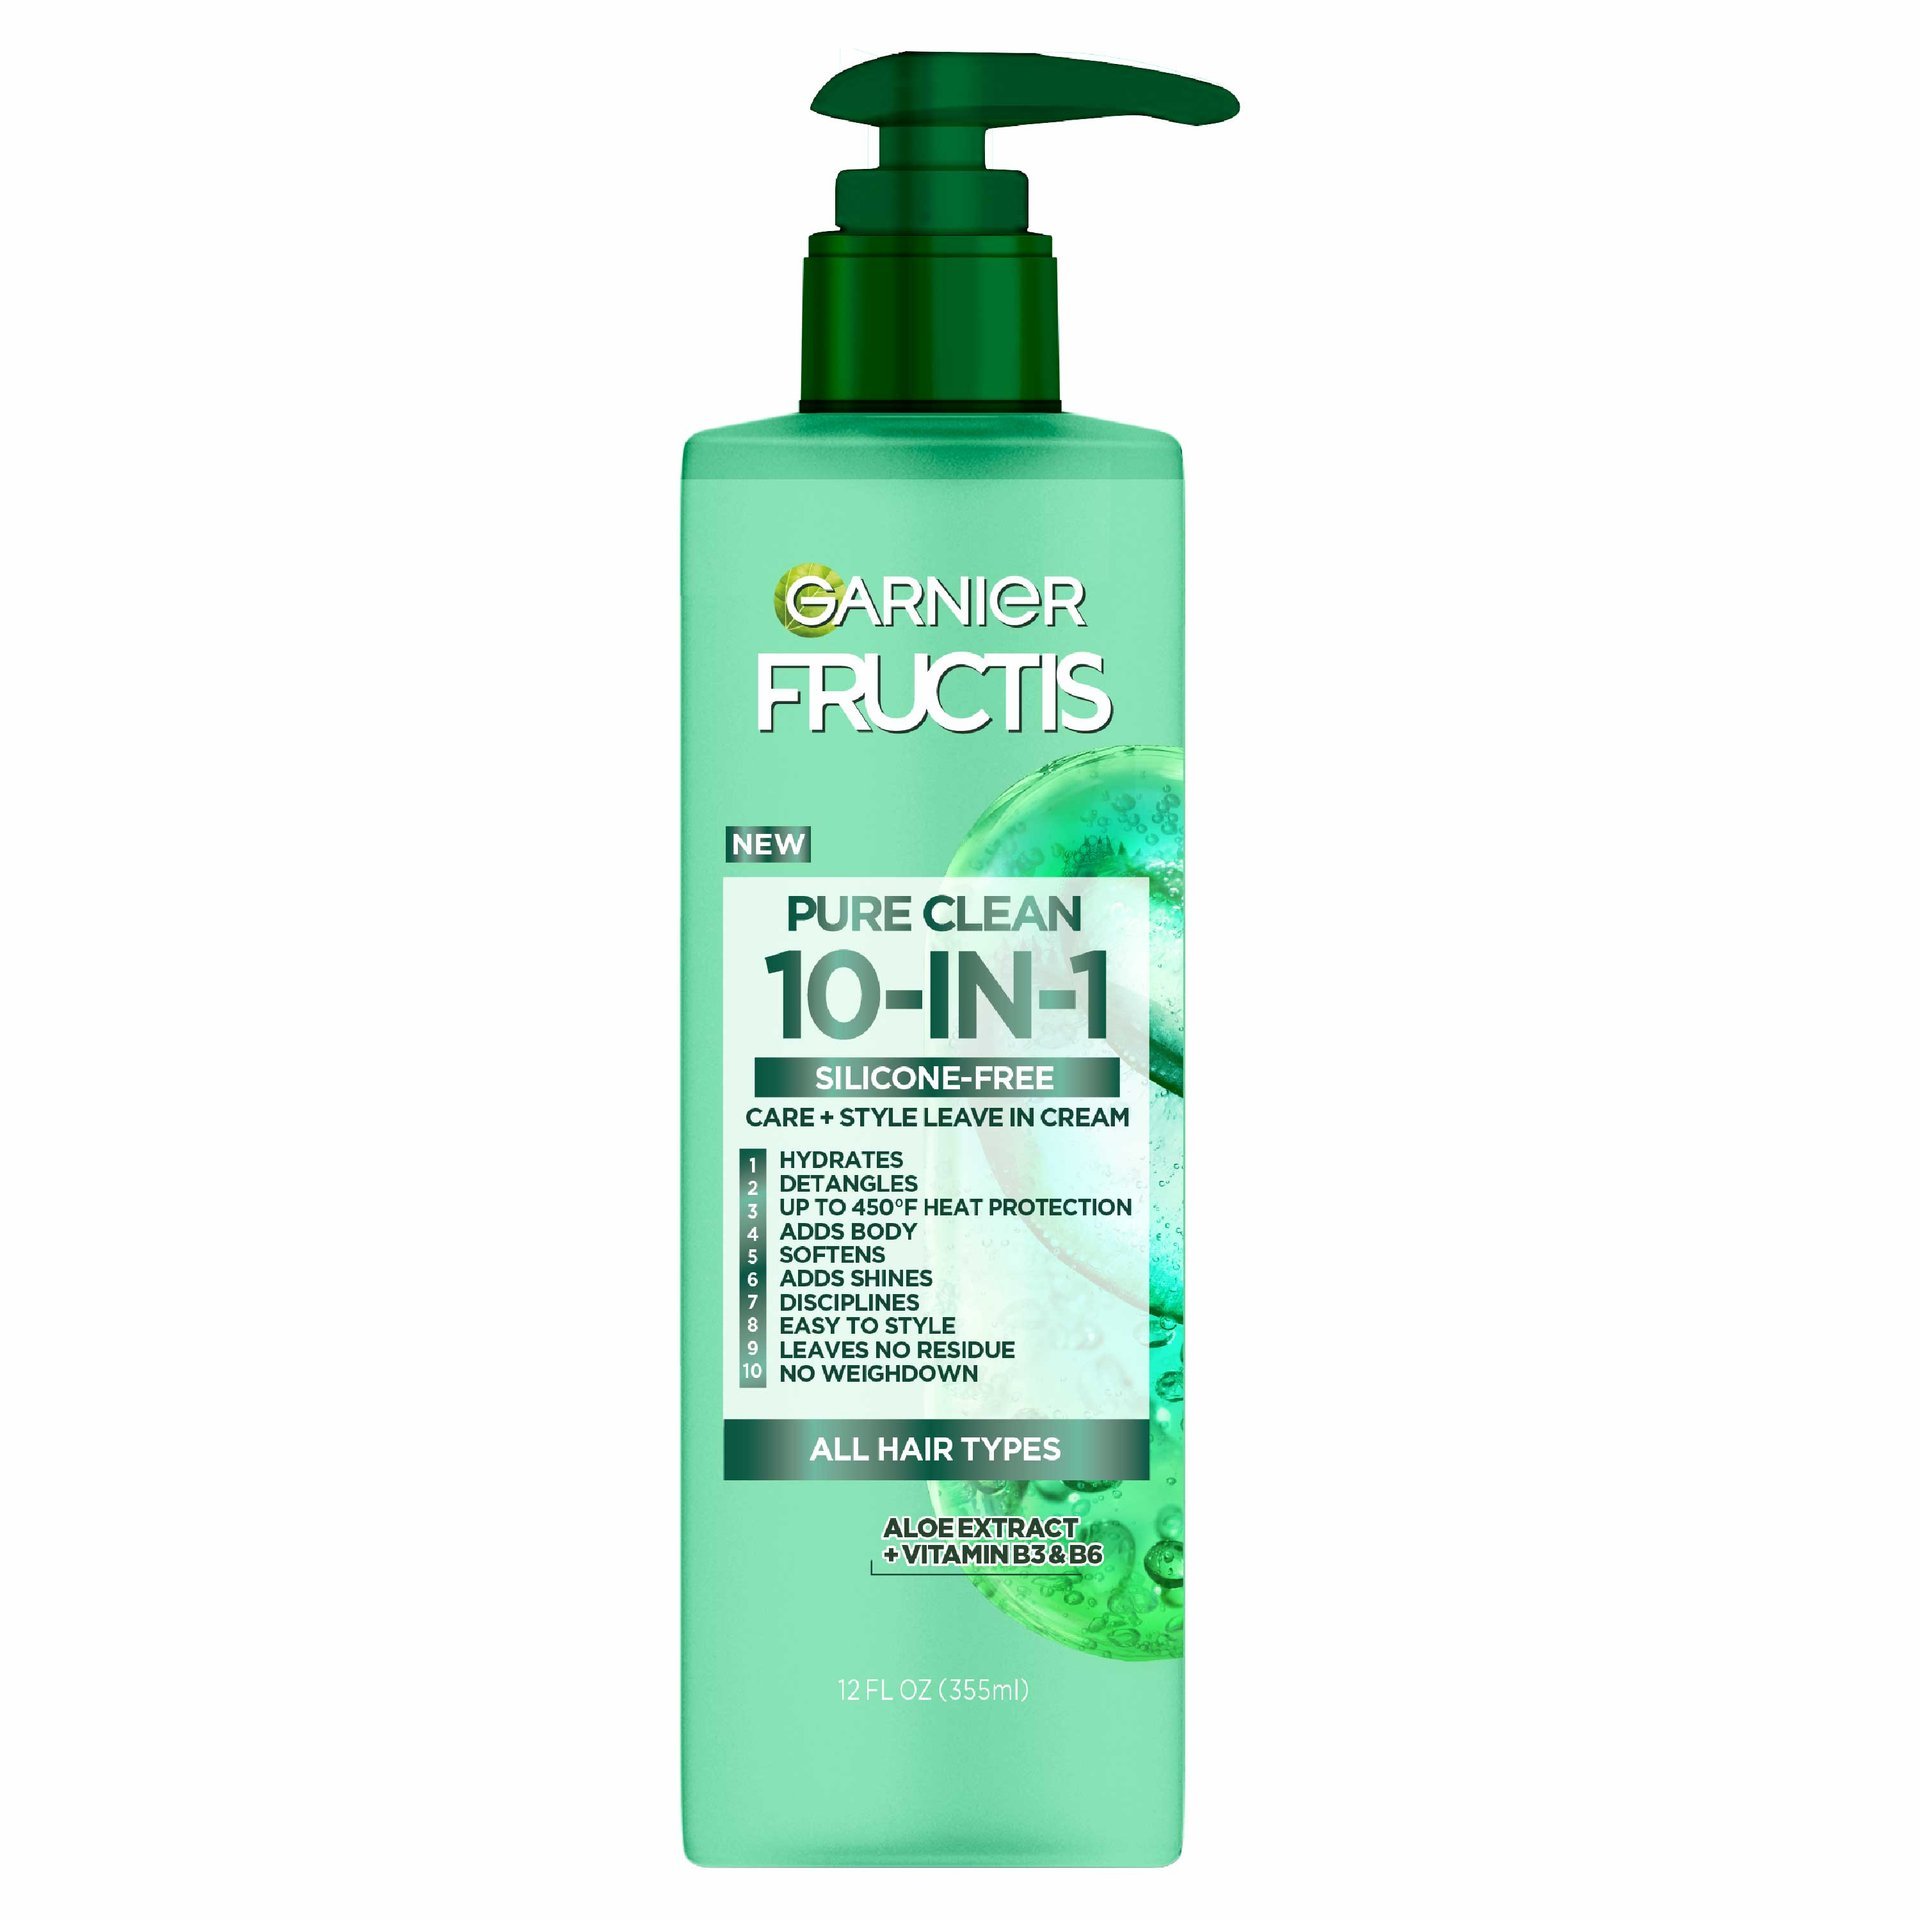 Garnier Fructis Pure Moisture 10-in-1 Leave-In Spray For Dry Hair & Scalp,  Hydrating Hair Treatment, With Hyaluronic Acid and Cucumber Water - 239ml,  10 immediate hair benefits 